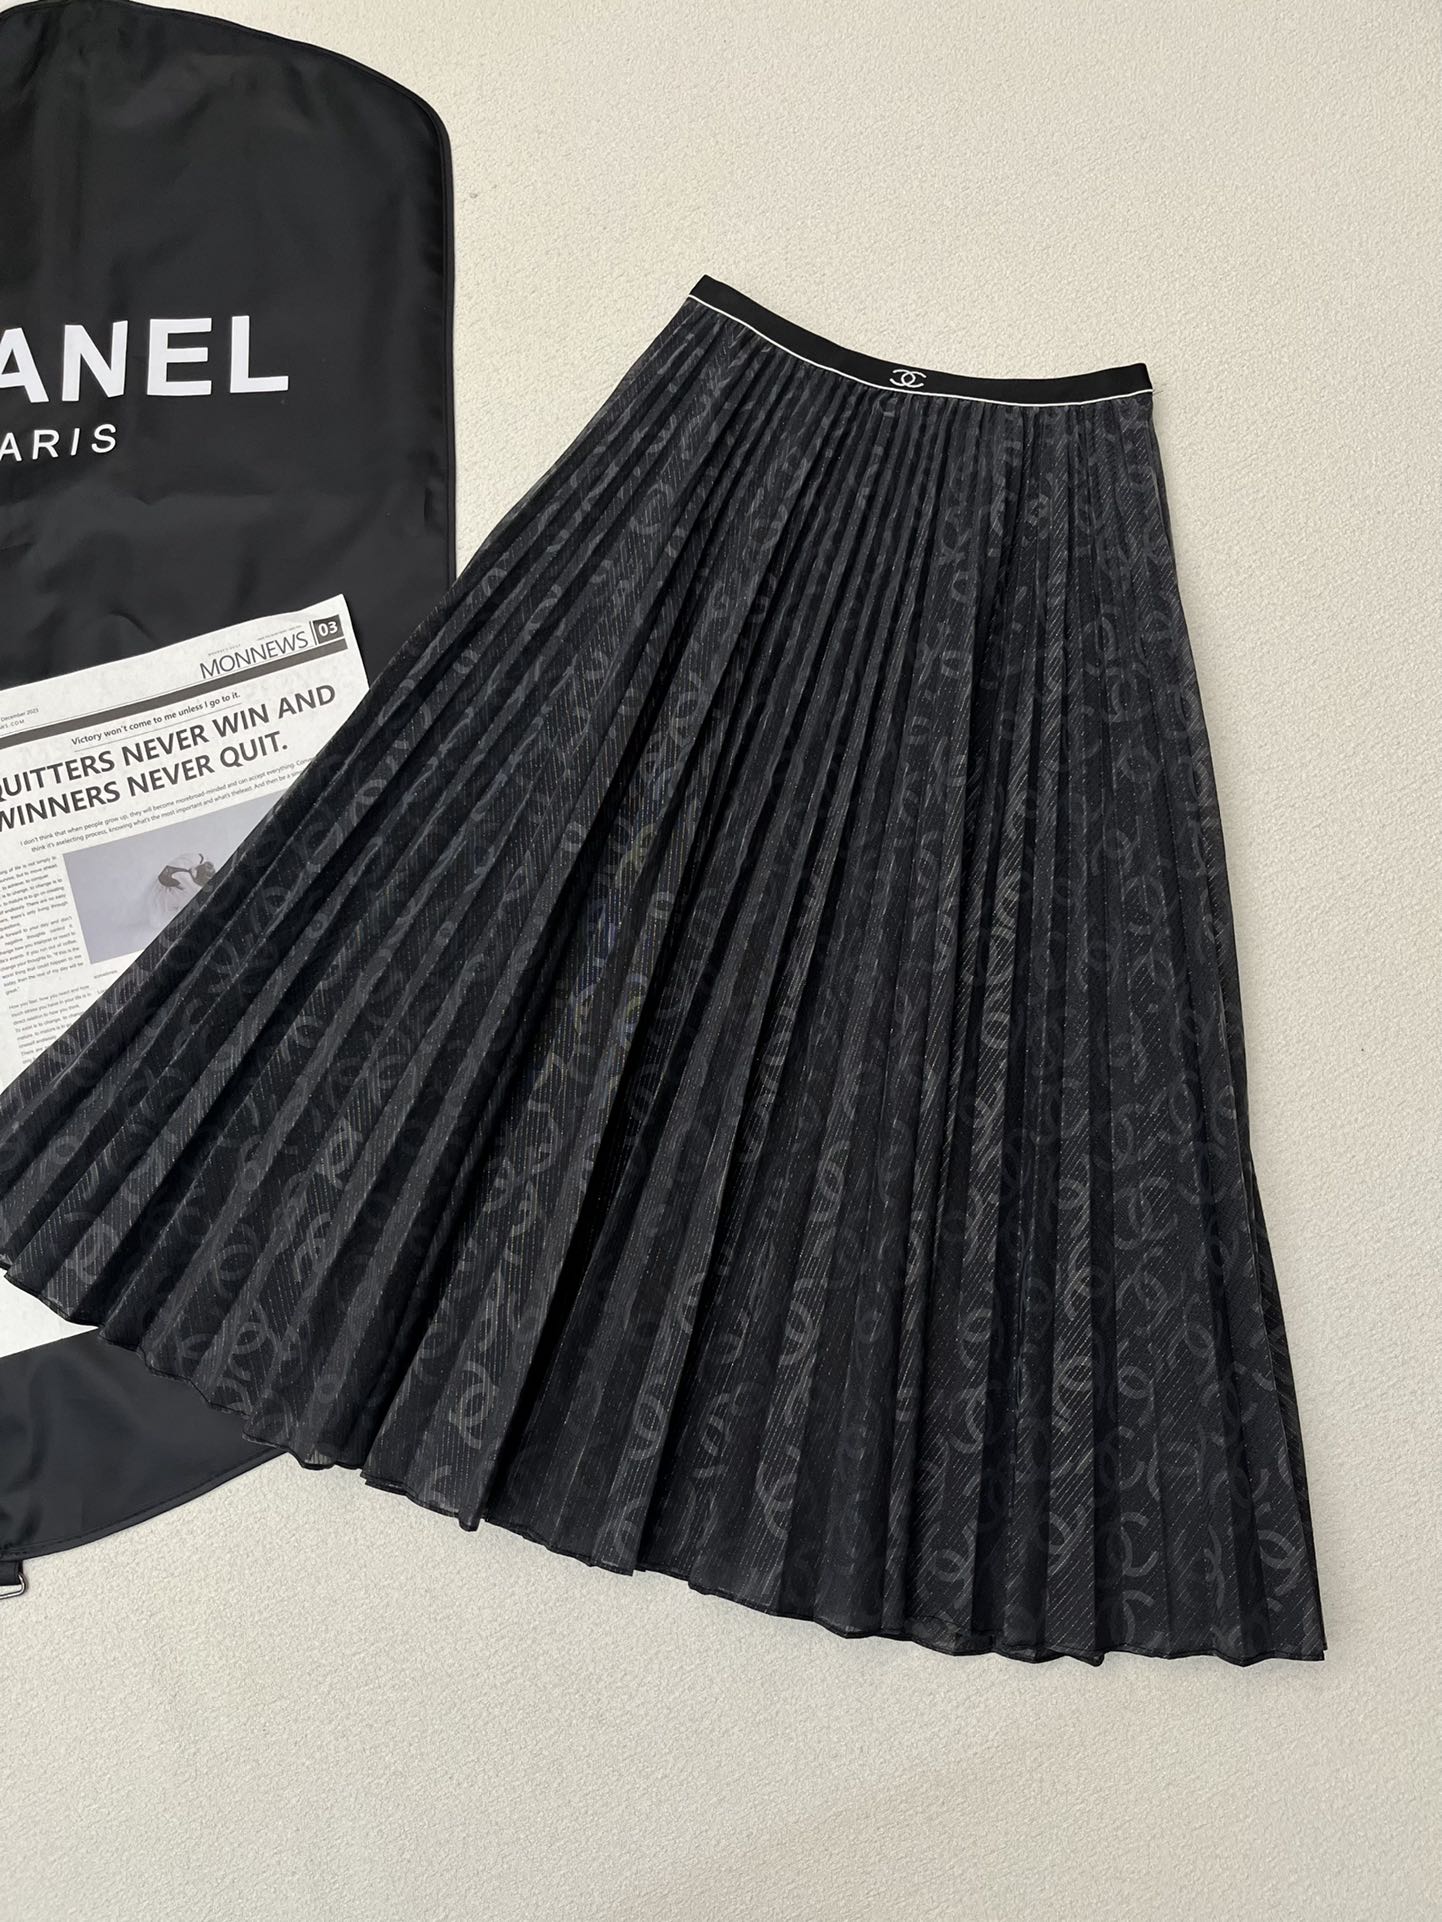 Chanel Clothing Skirts Printing Spring Collection Vintage